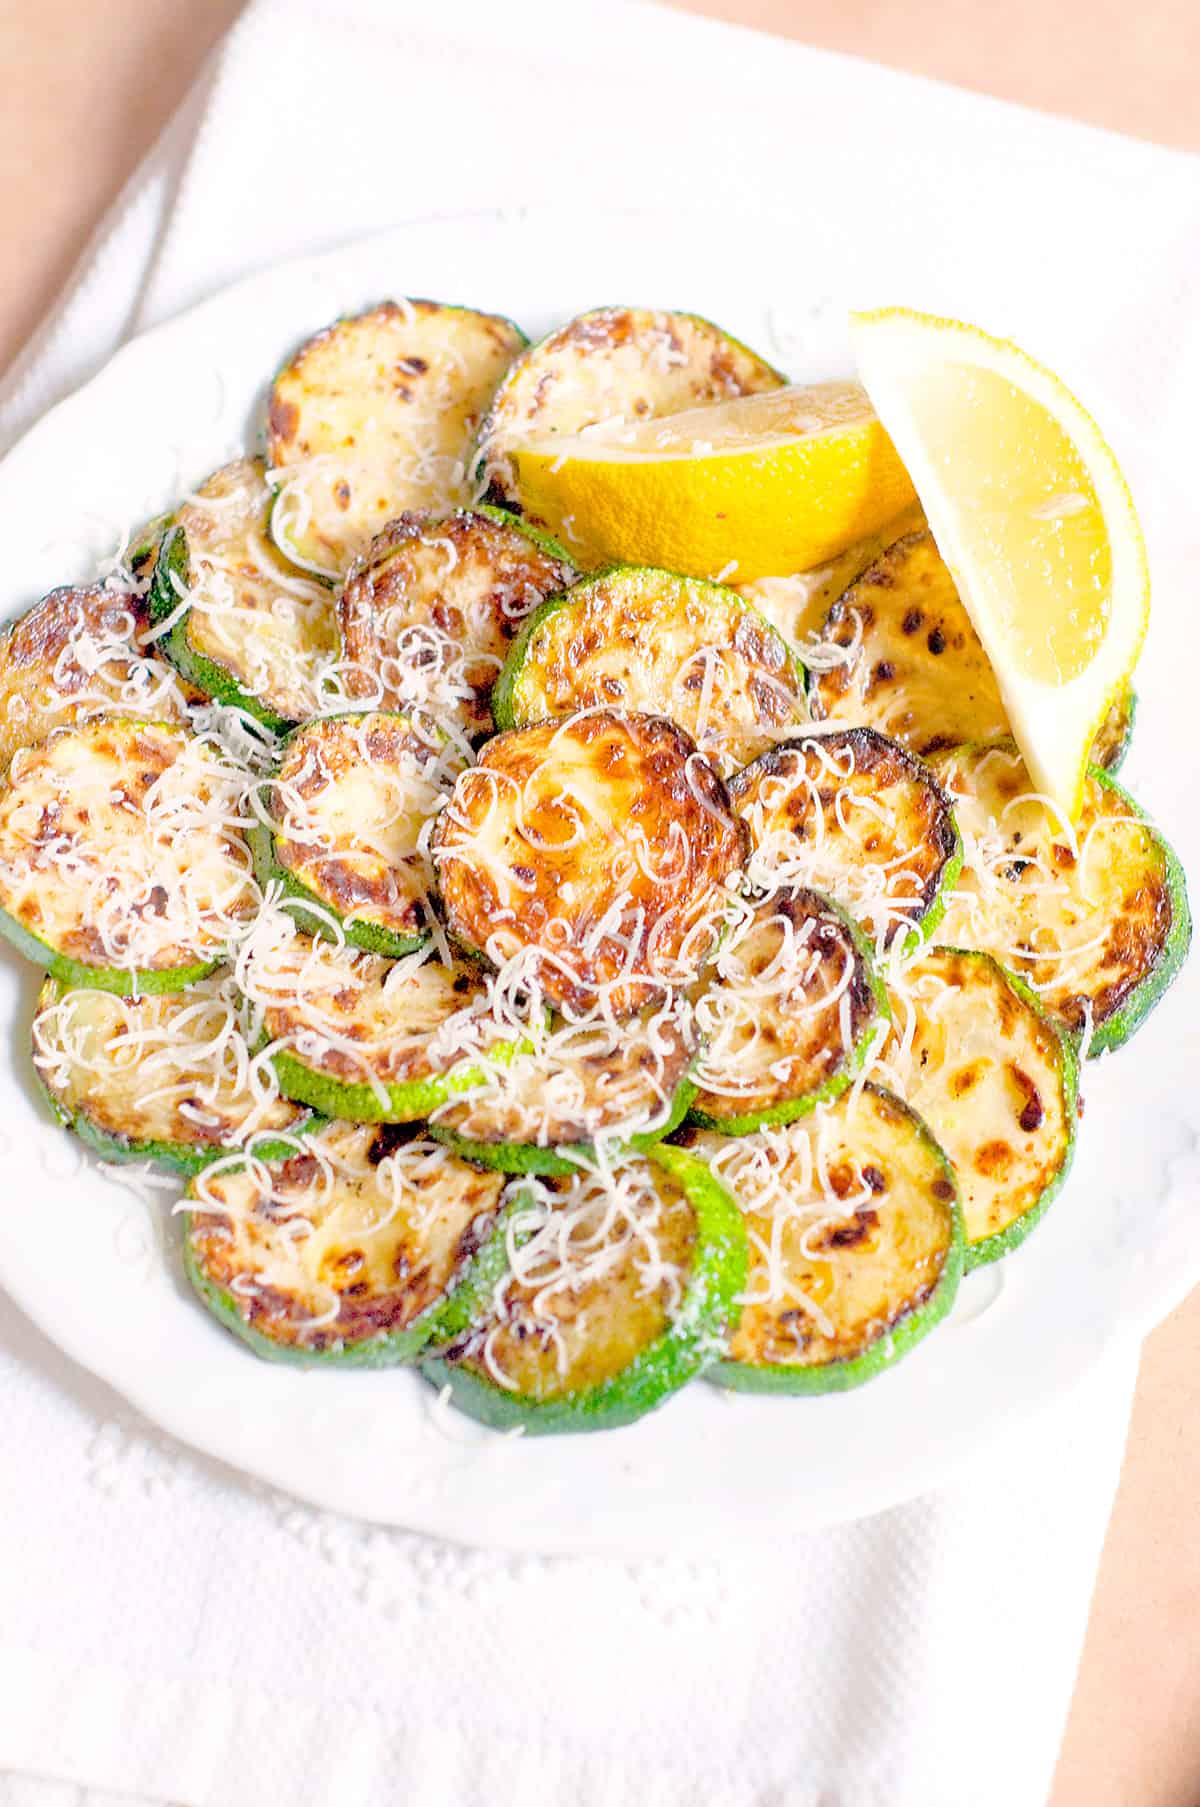 Pan Fried Zucchini with Parmesan and Lemon arranged on a serving plate.